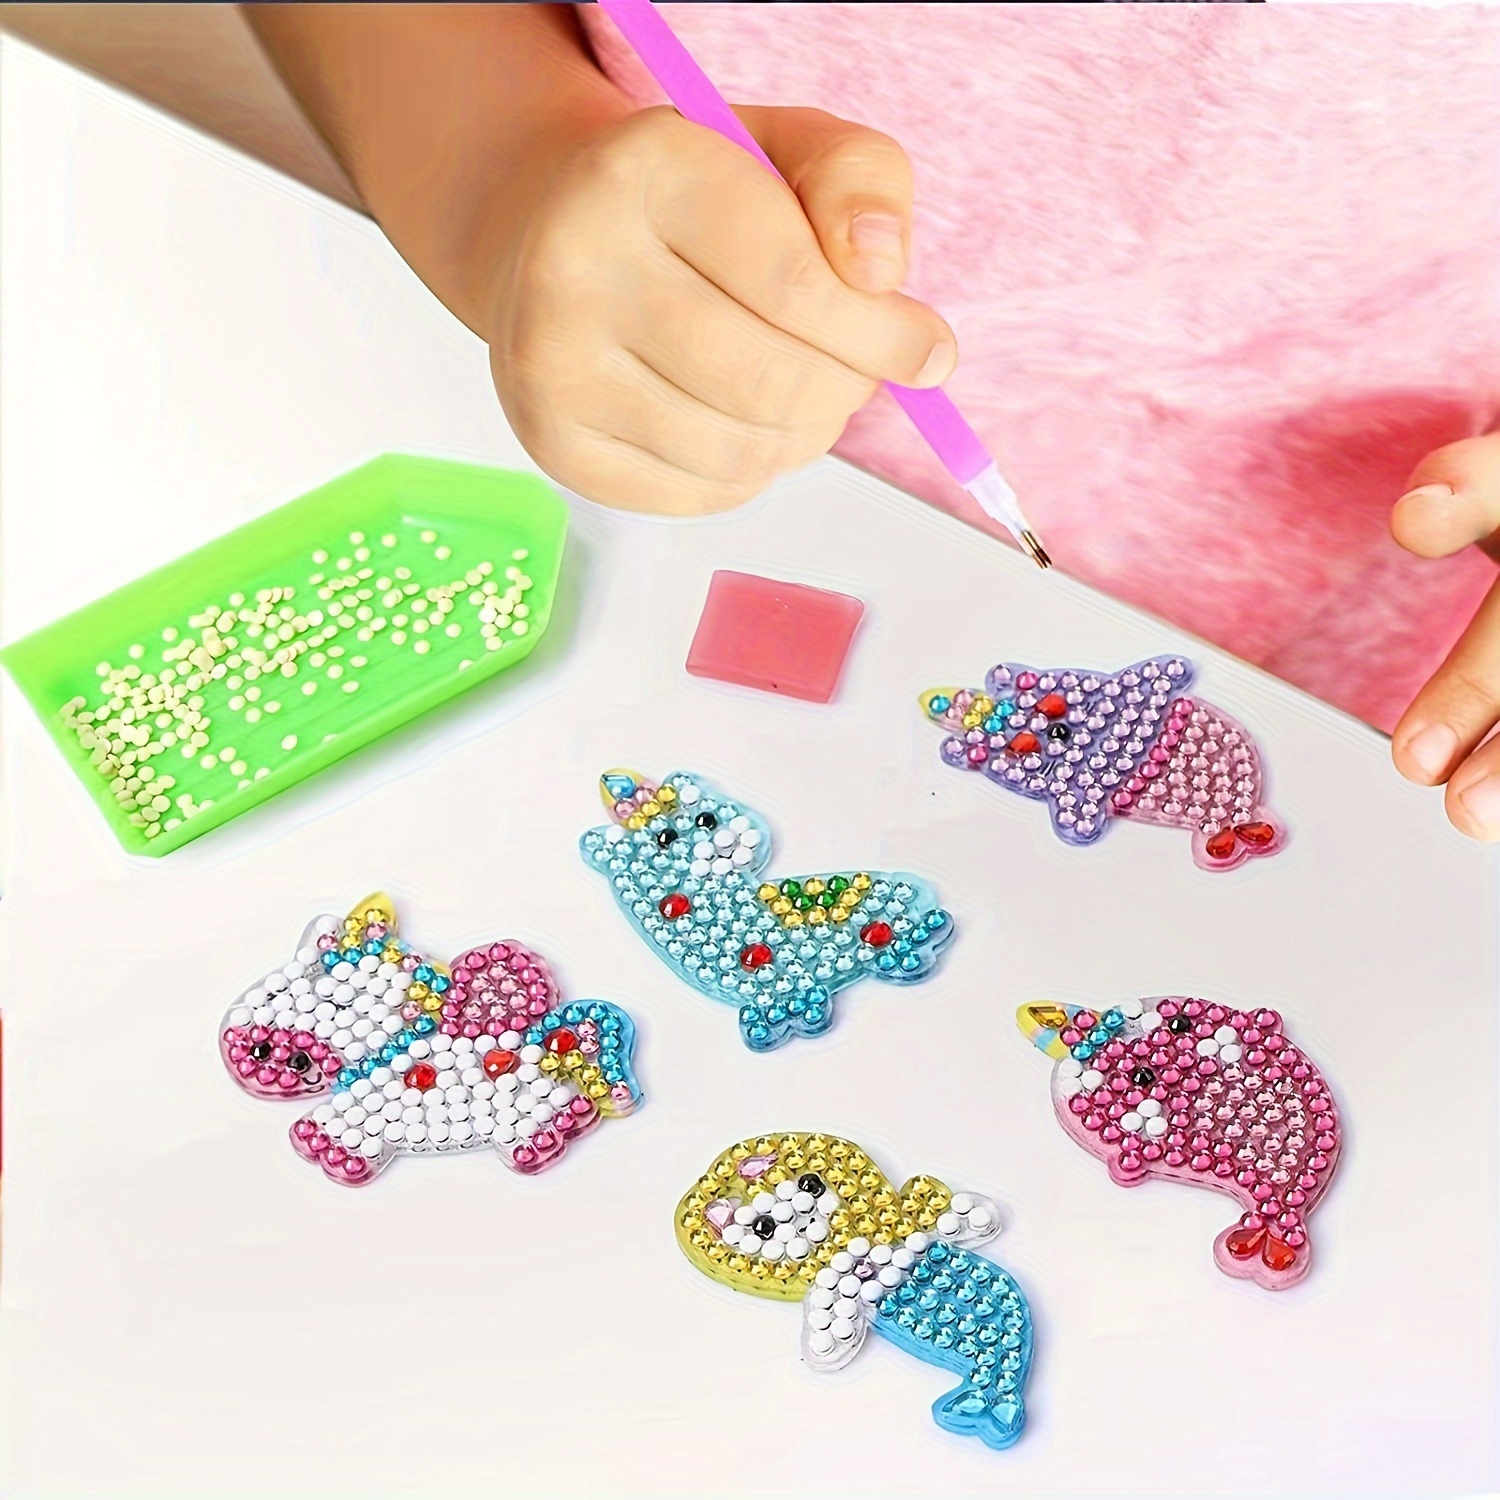 Gem Painting Kit- Make Your Own Keychains- Diamond Art Painting by Numbers  for Girls, Boys, Kids (Owl)